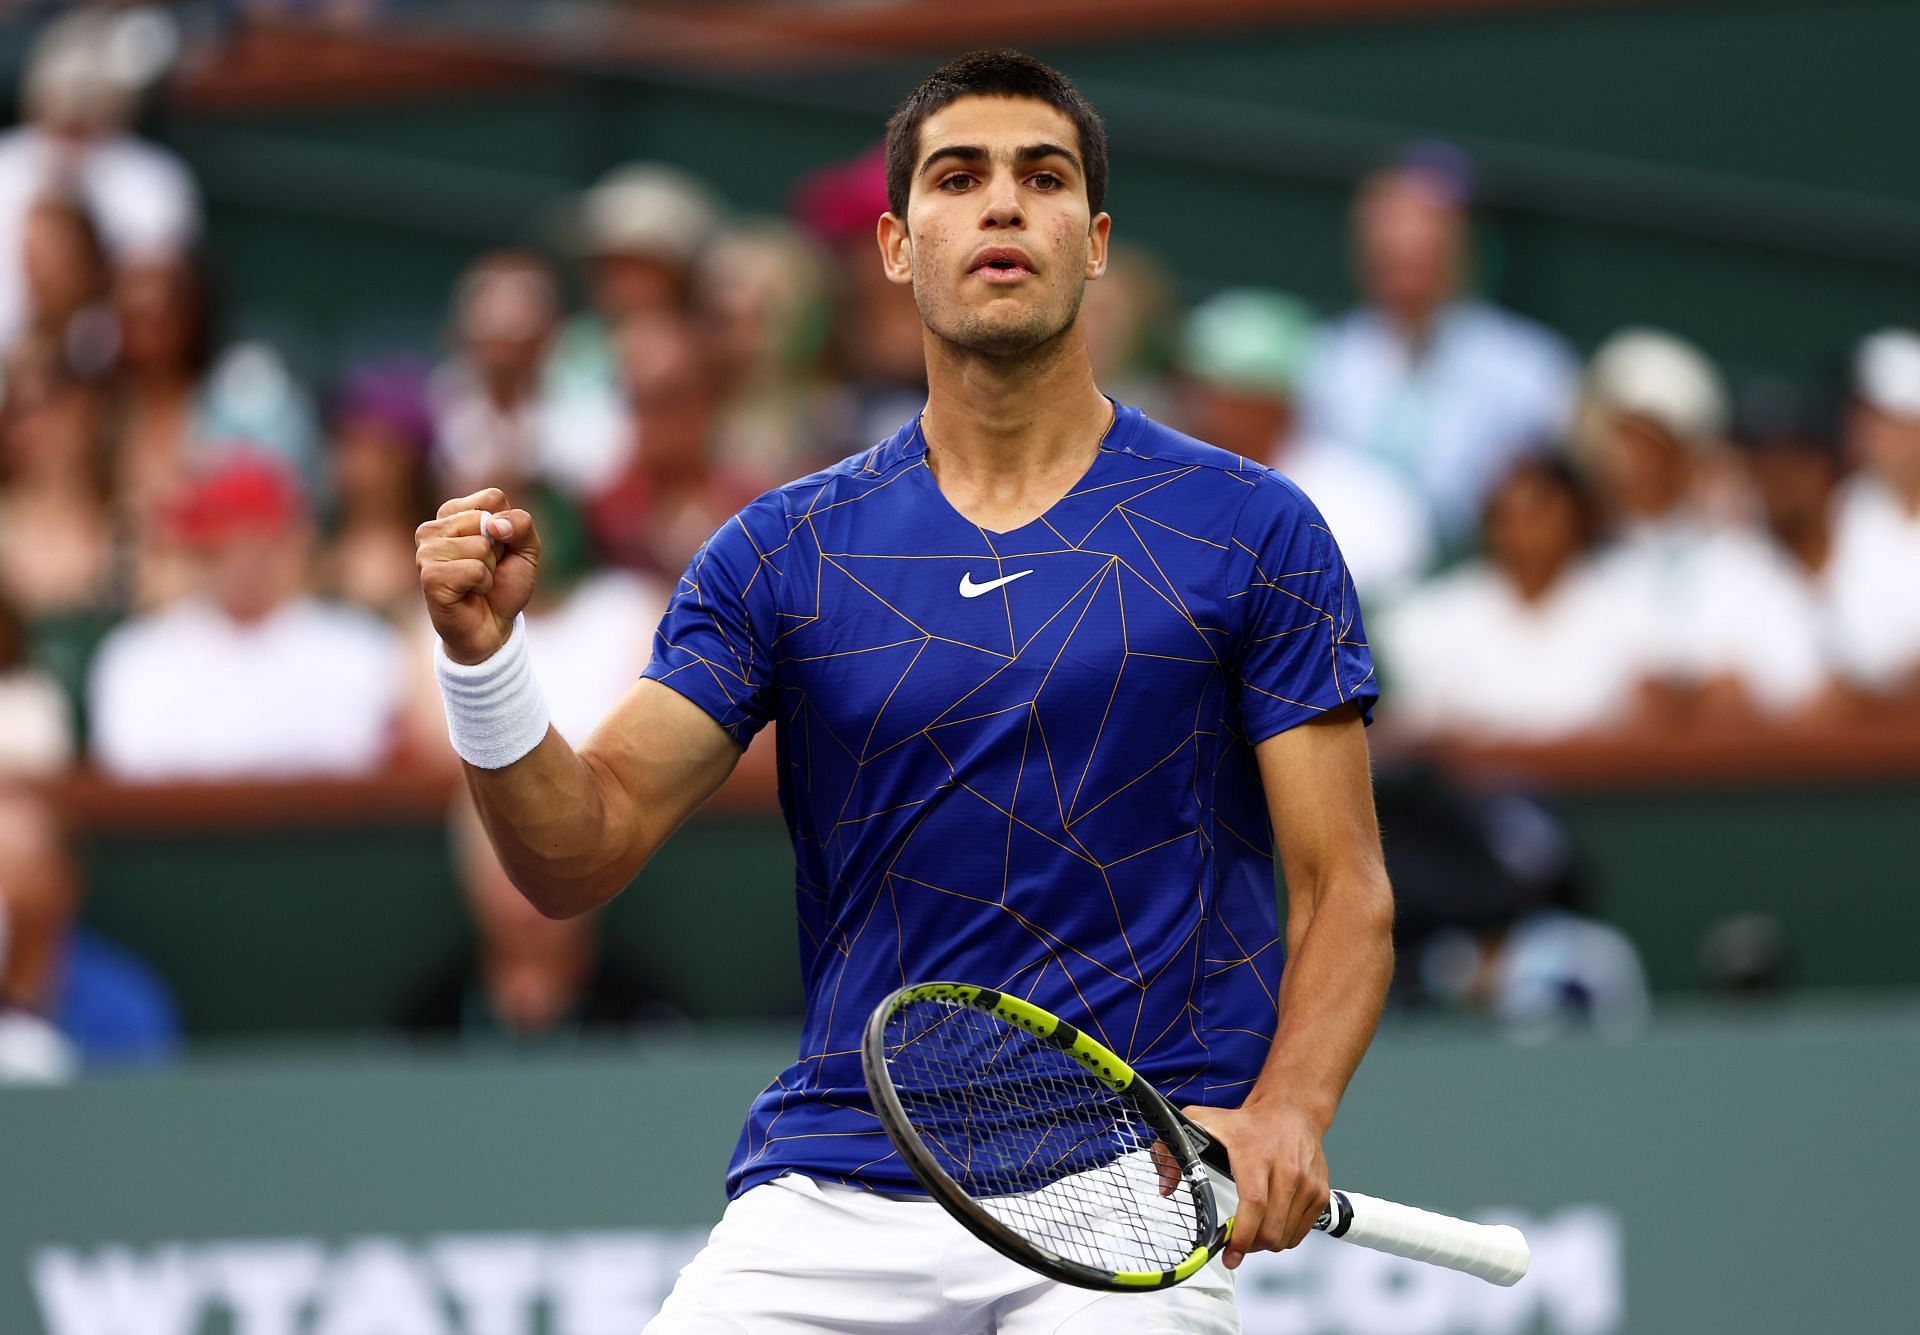 Carlos Alcaraz is among the favorites to win the Miami Open.